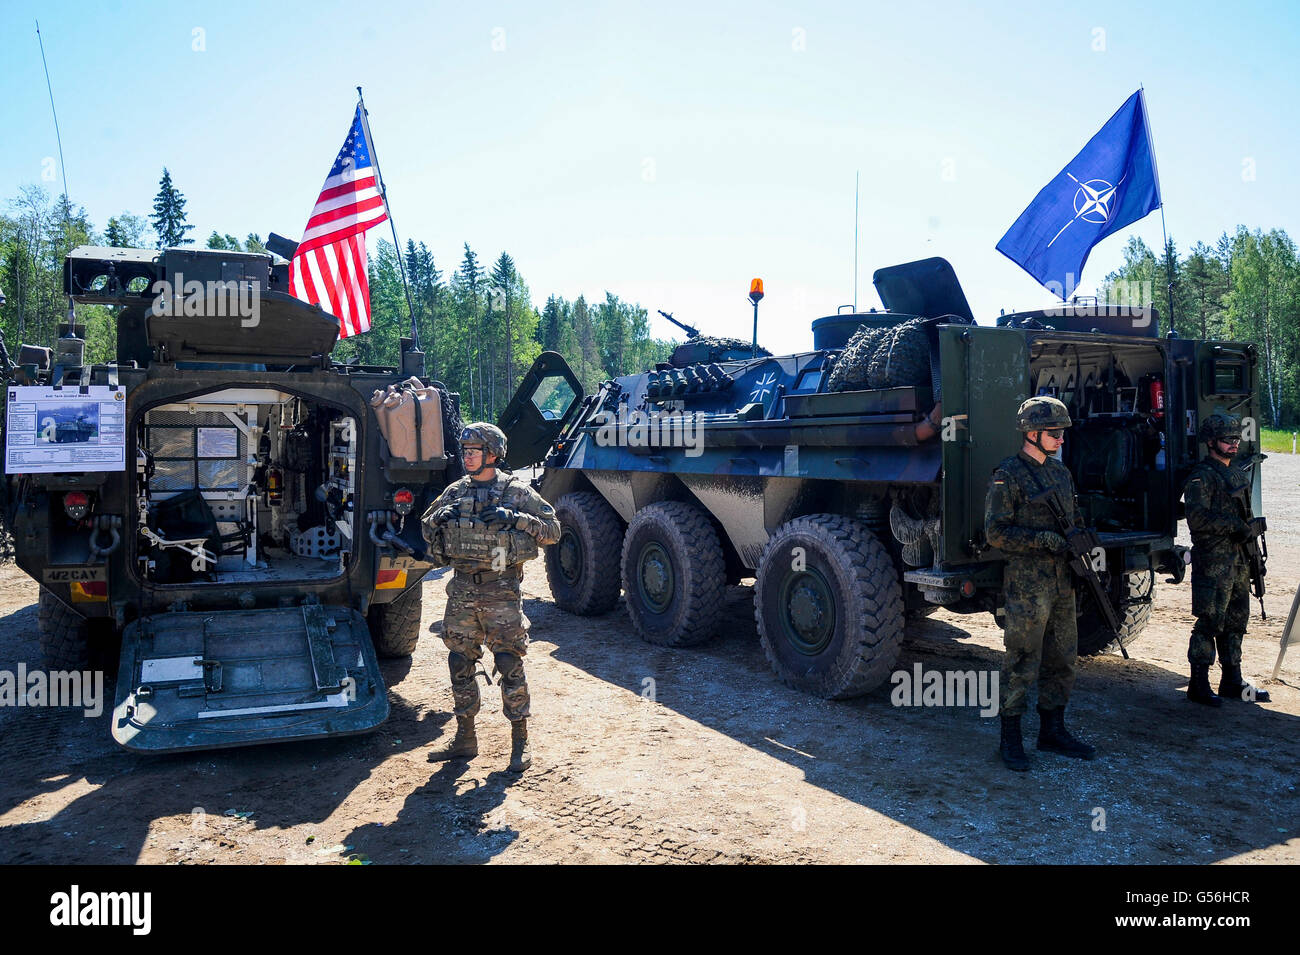 Tapa. 20th June, 2016. US Army and German army soldiers attend the Saber Strike military exercise at Central pylon in Tapa, Estonia on June 20, 2016. Saber Strike is an annual U.S.-led exercise of land and air forces. © Sergei Stepanov/Xinhua/Alamy Live News Stock Photo